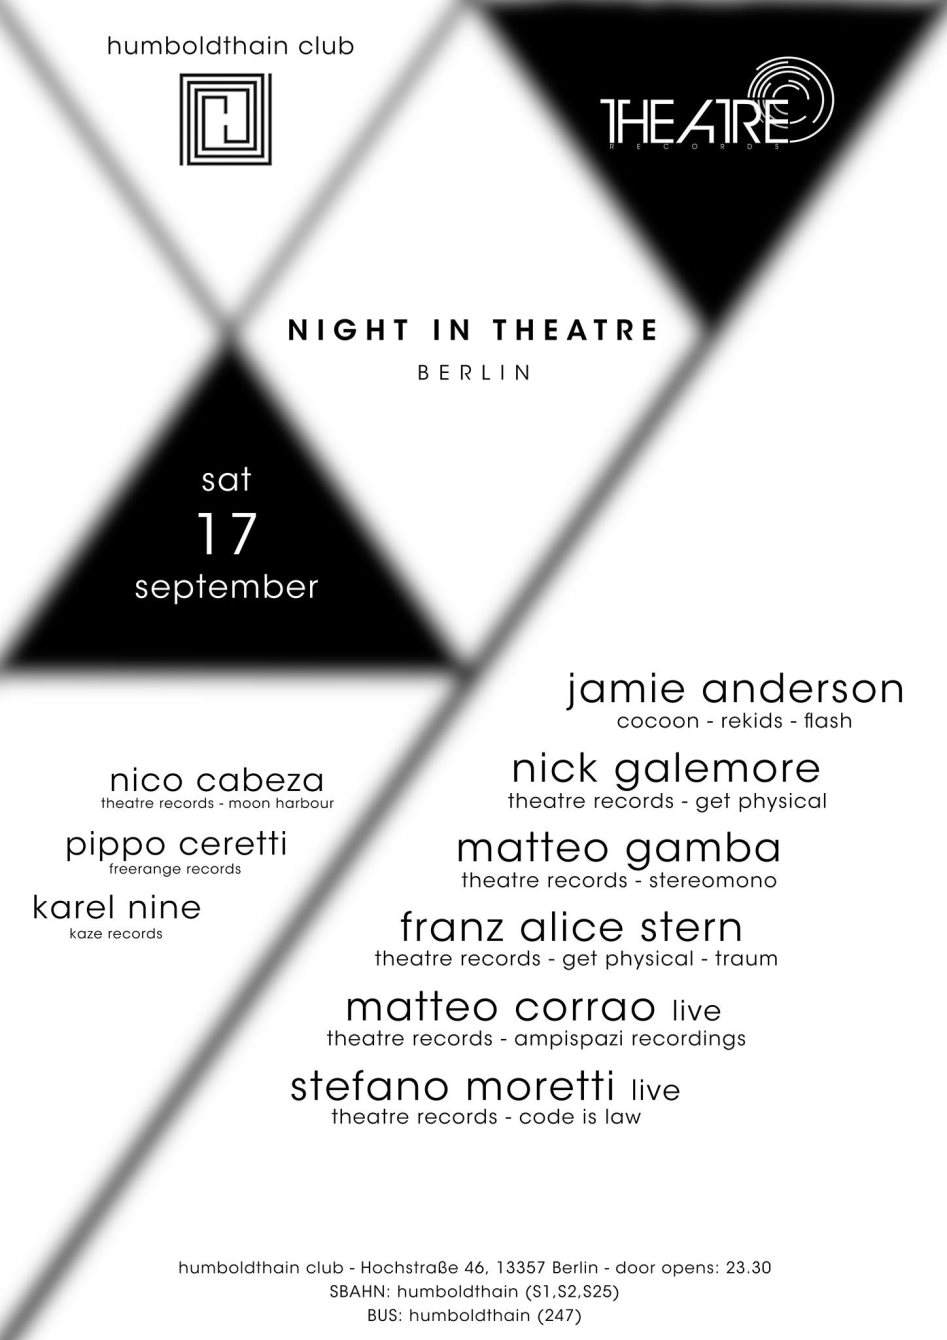 Theatre Records presents: Night In Theatre - Berlin with Jamie Anderson, Nick Galemore and More - フライヤー裏